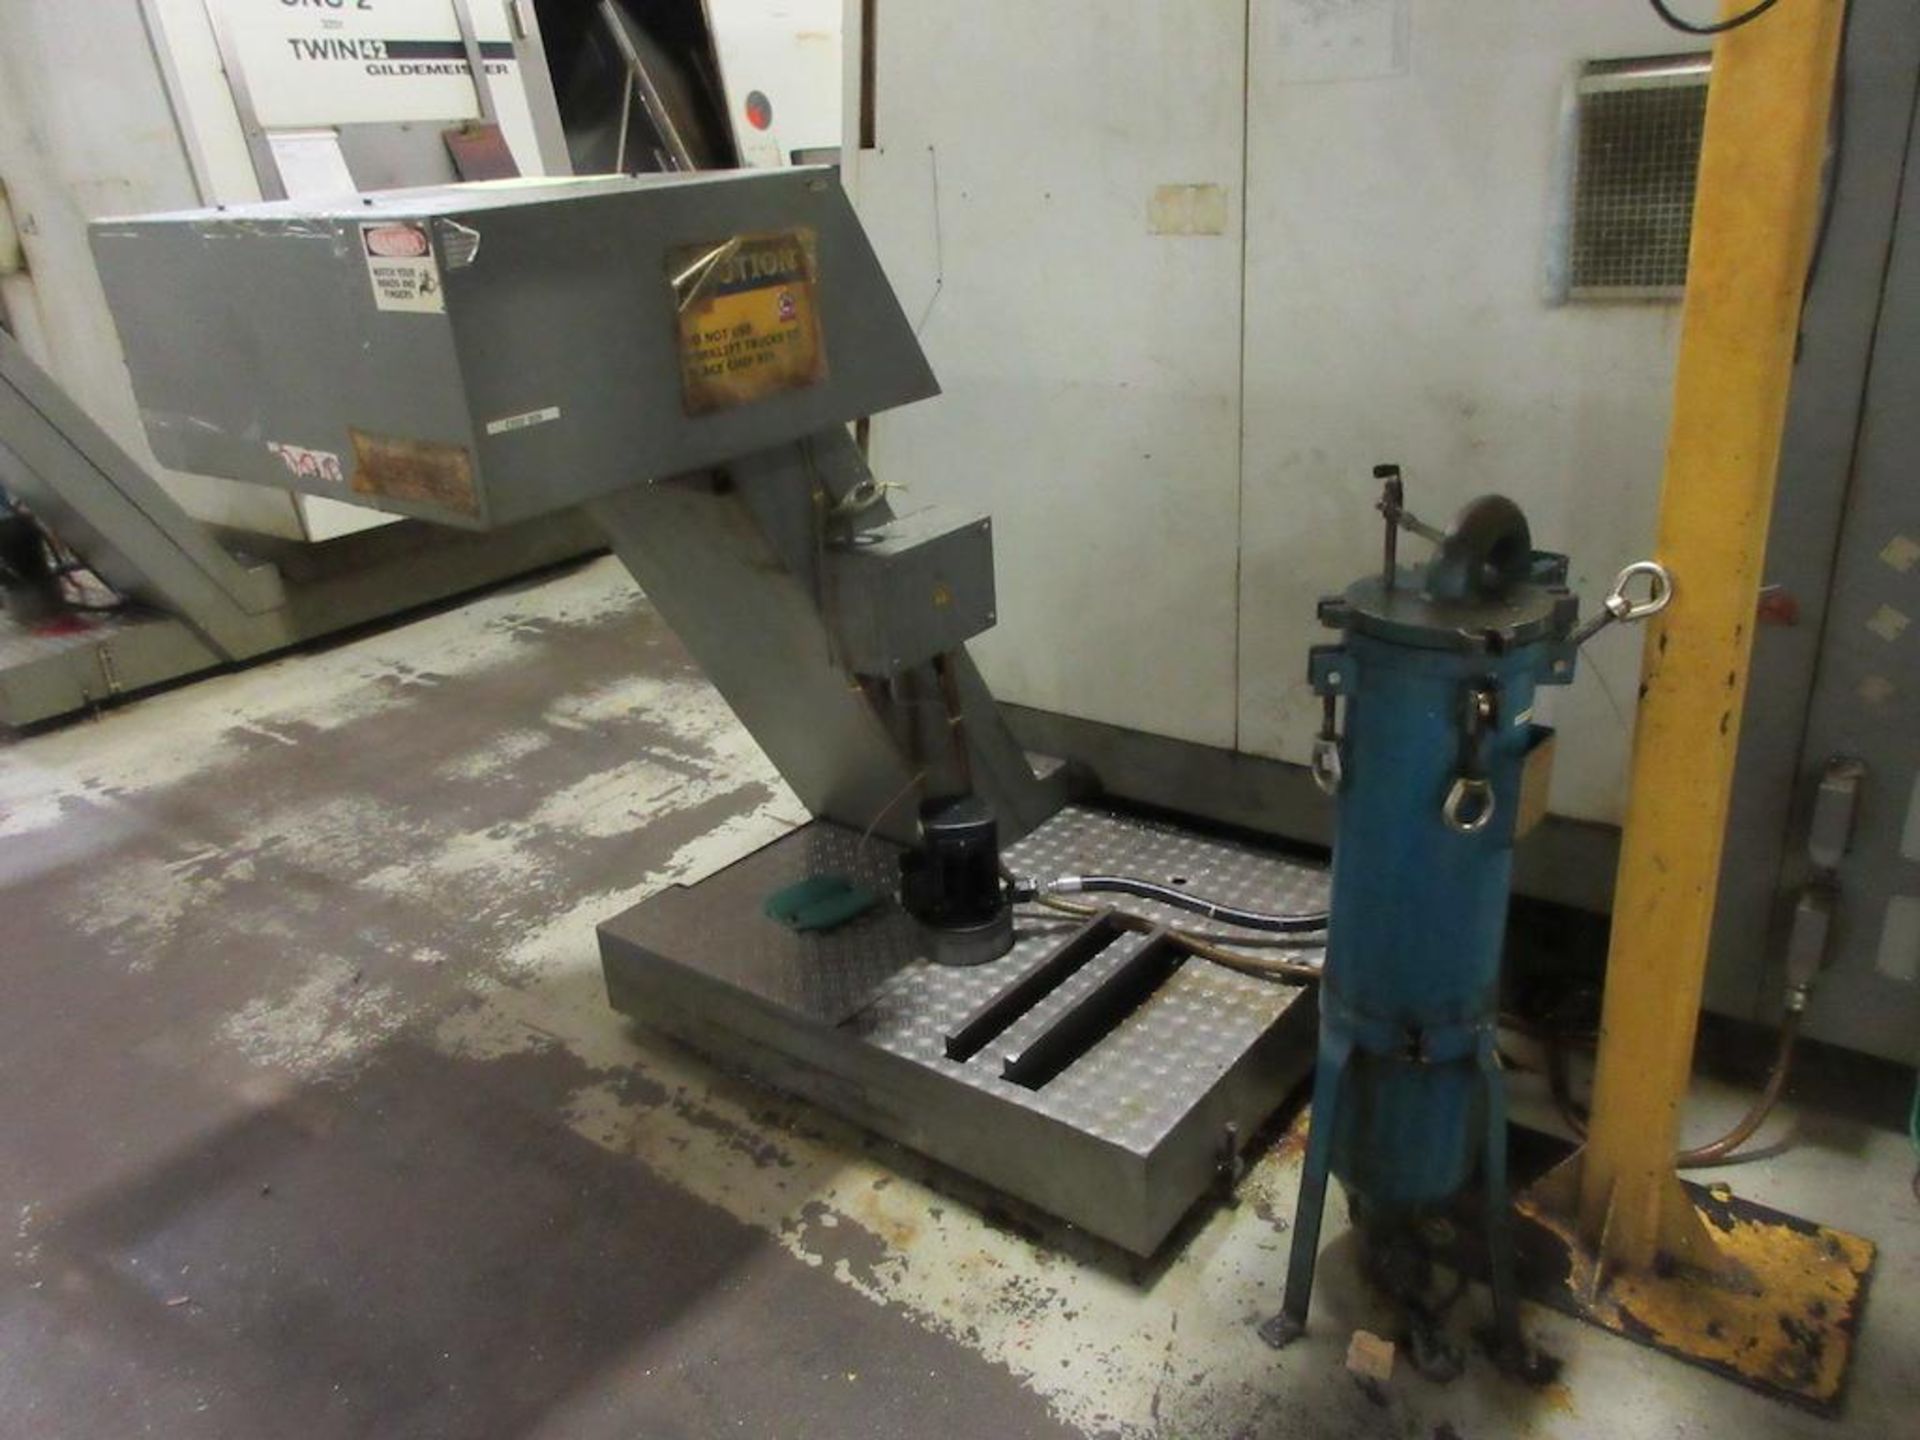 2006 DMG CNC Lathe, Model Twin 42, Twin Spindle, 4 Axis, CNC Control, B-Axis, Swing Diameter 5.7Ó, - Image 16 of 16